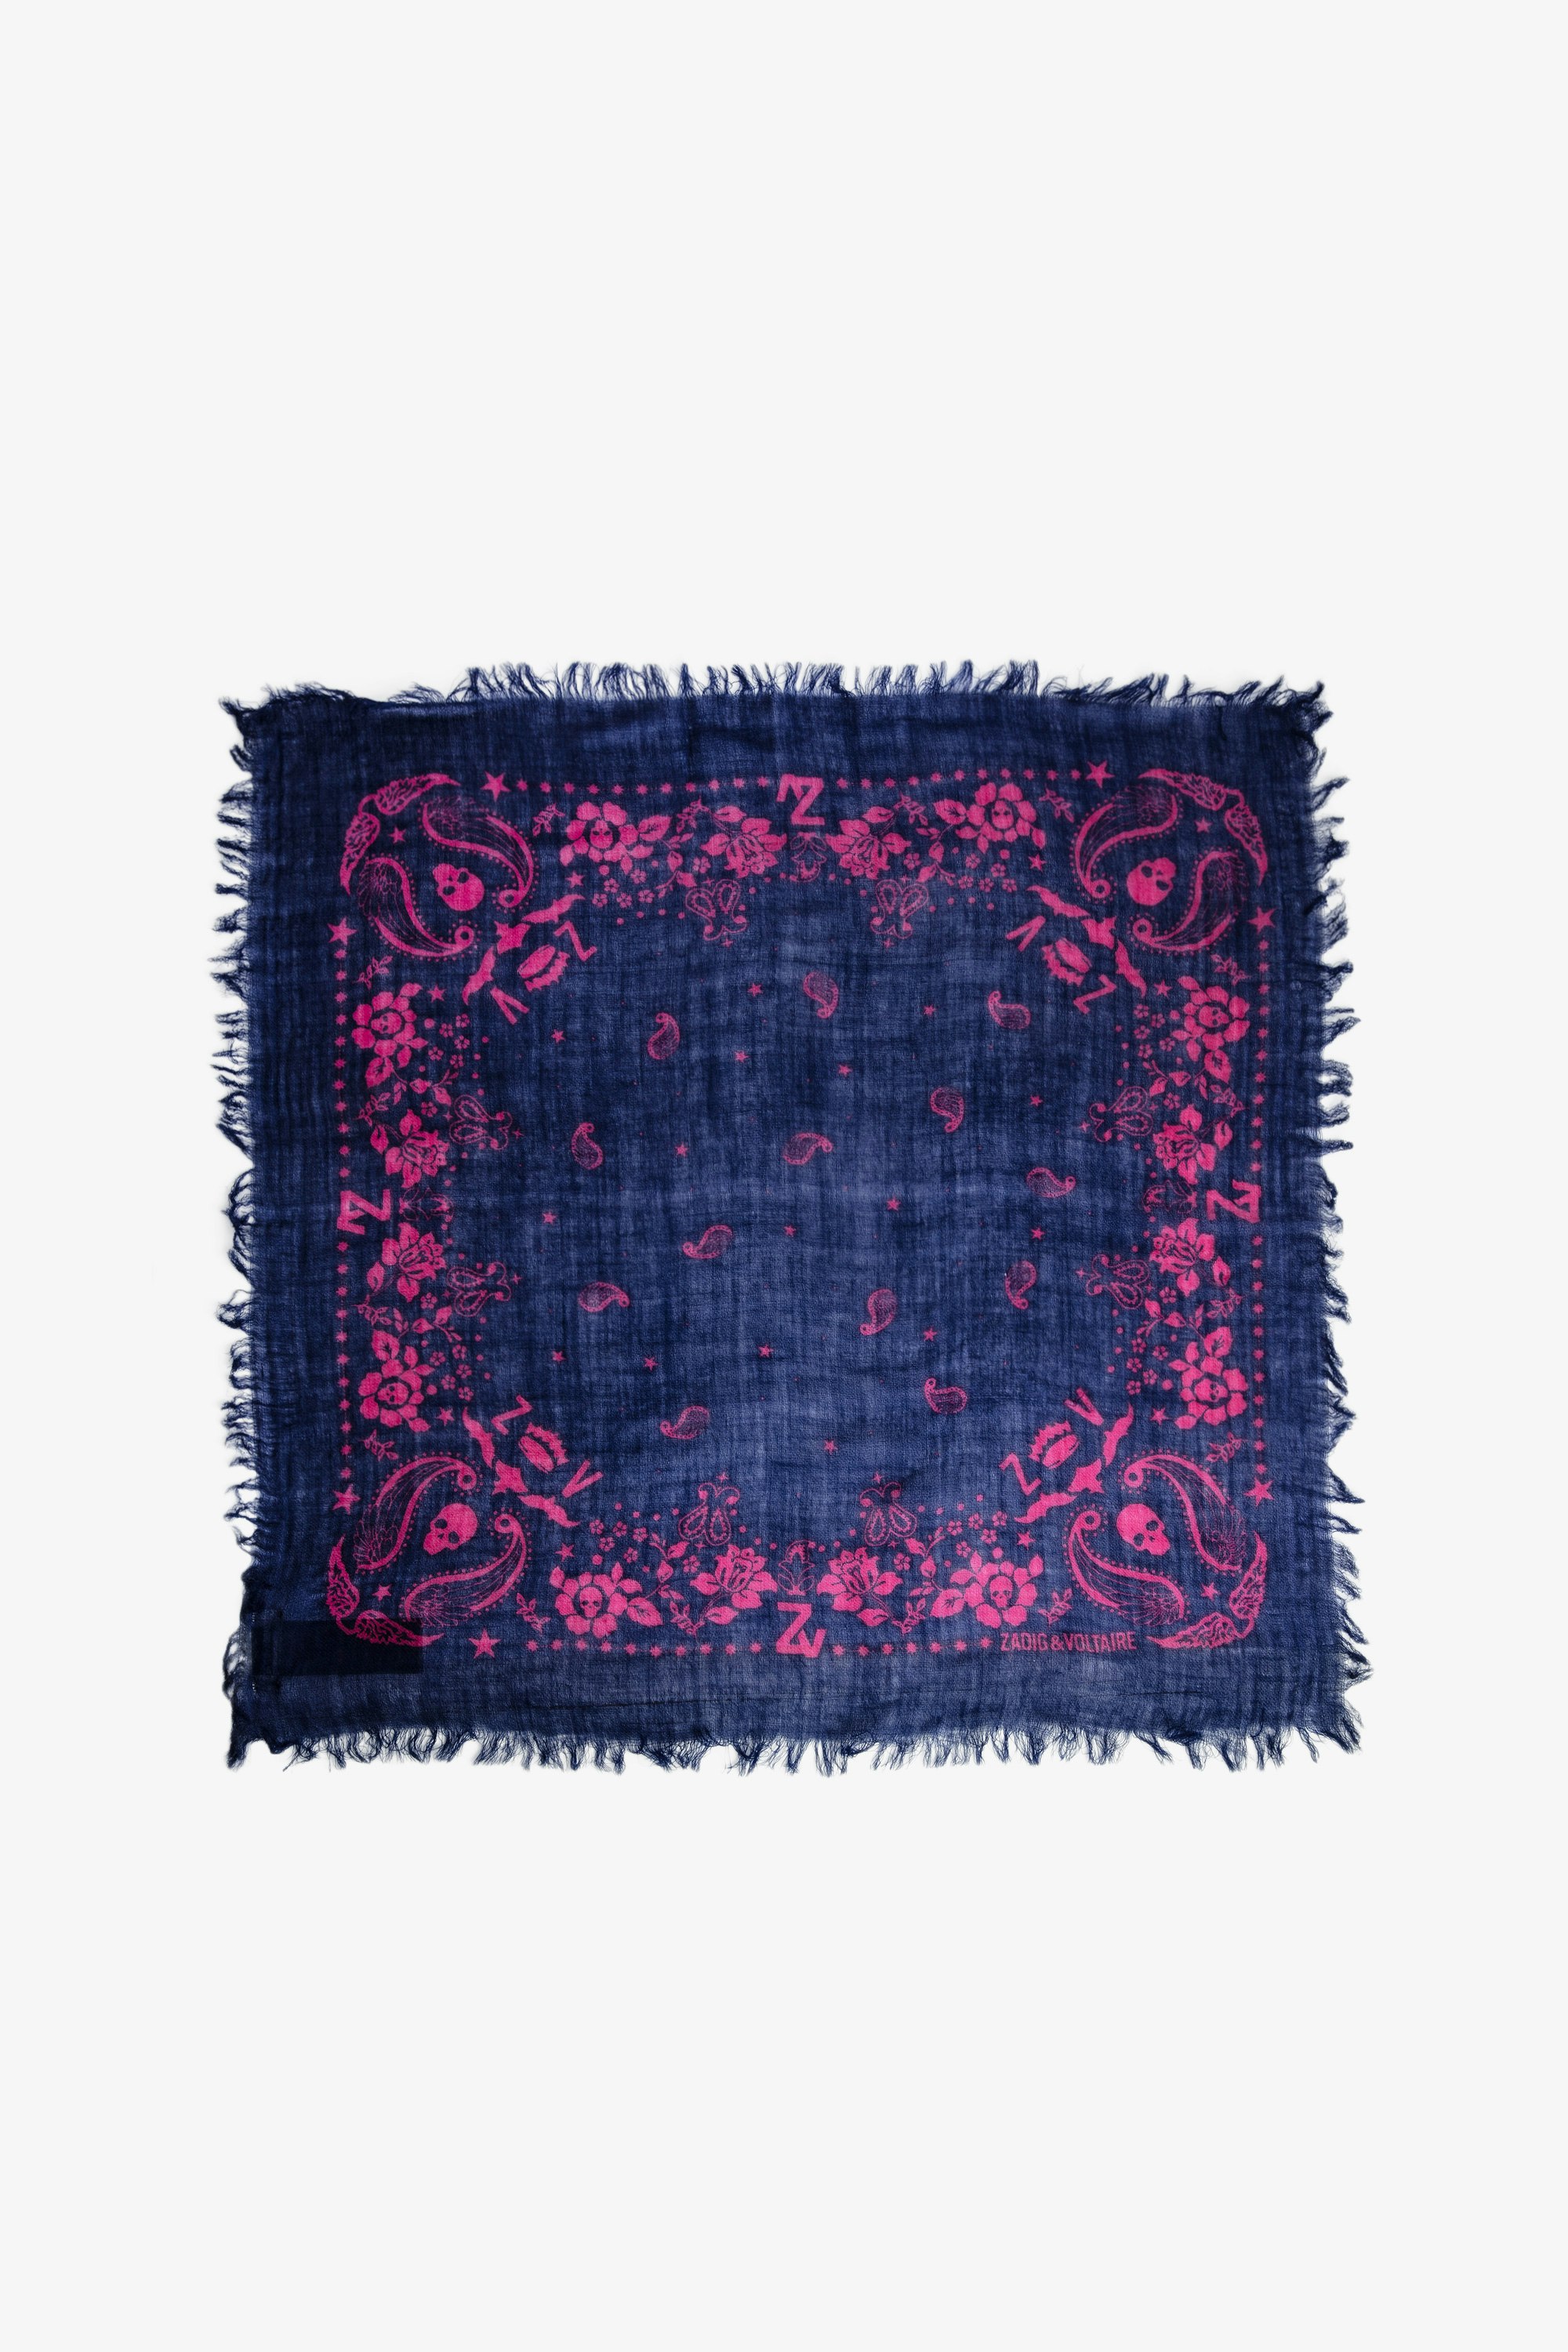 Nuage Nano カシミヤ ストール Women’s navy blue cashmere scarf with contrasting bandana print